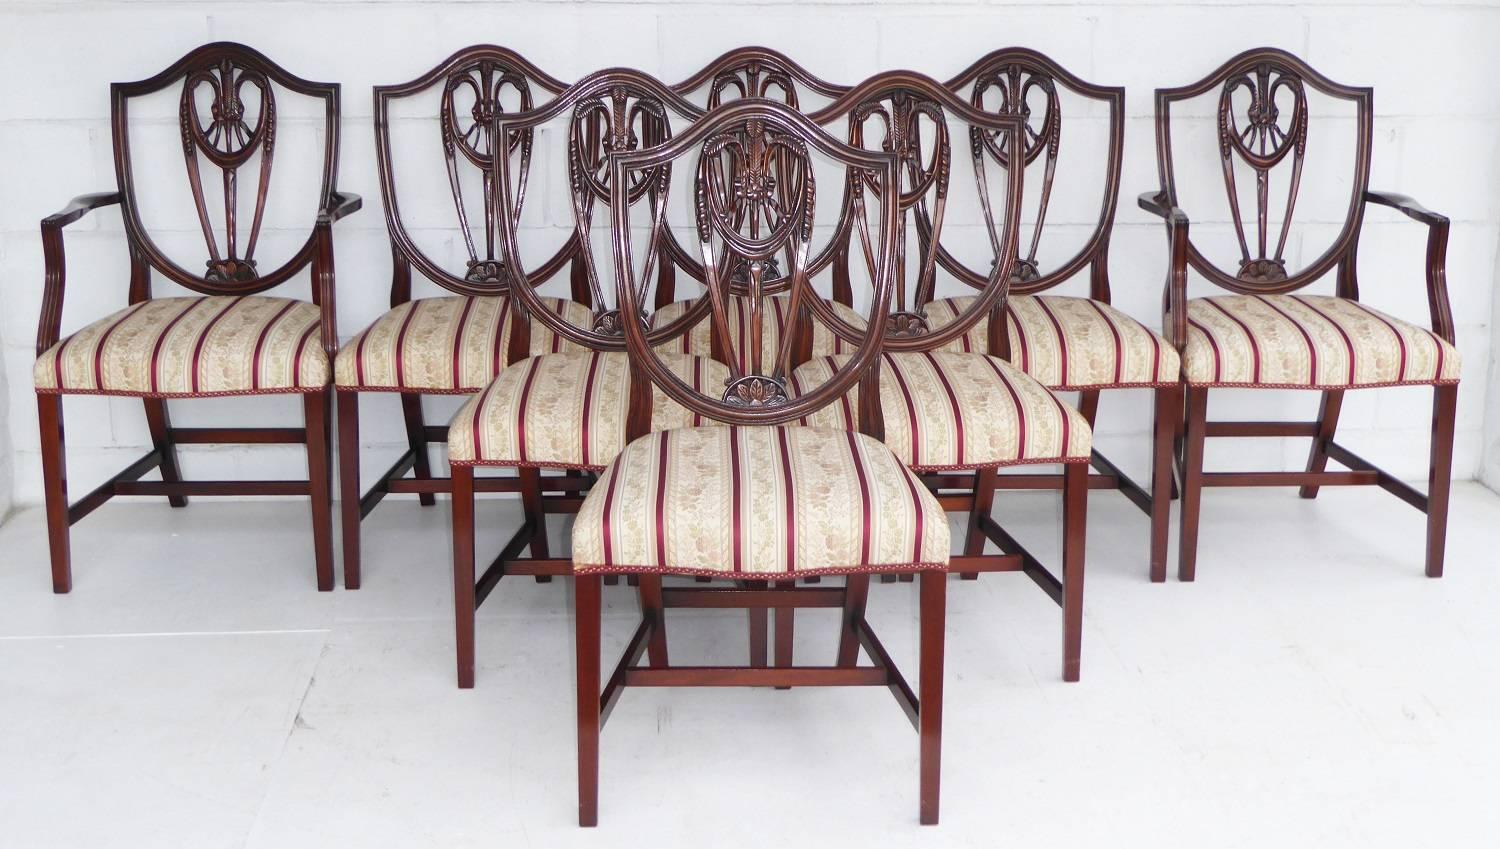 For sale is a top quality Regency style mahogany pedestal dining table and eight chairs by Bevan and Funnell, a top English cabinet maker. The table has two additional leaves allowing the table to seat eight comfortably. The chairs have a shield